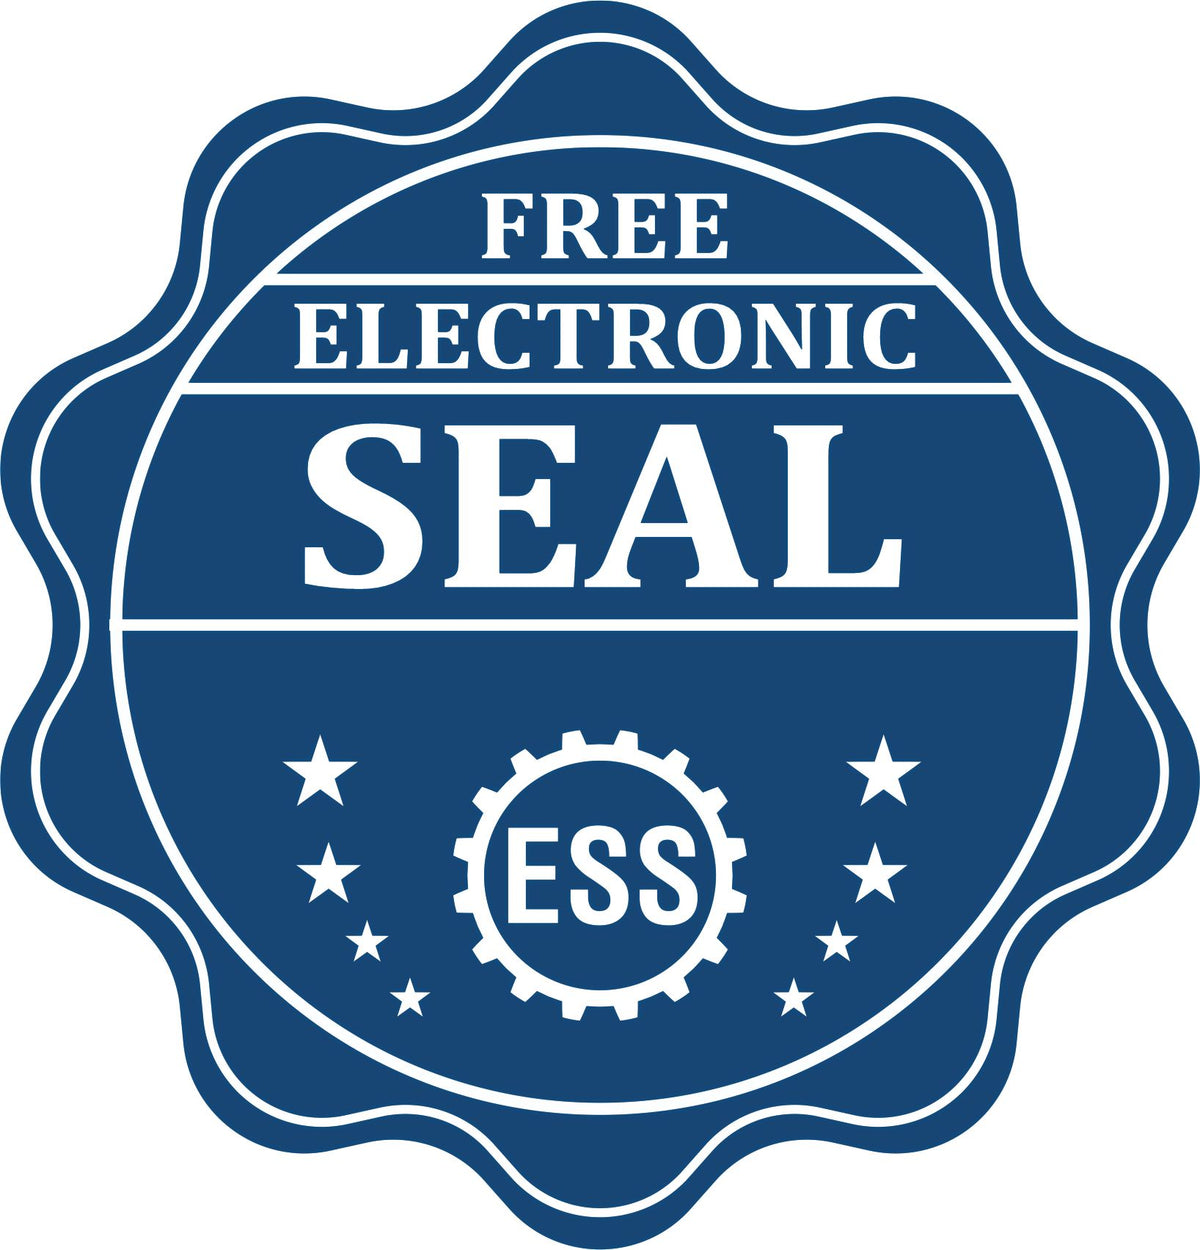 A badge showing a free electronic seal for the State of Tennessee Long Reach Architectural Embossing Seal with stars and the ESS gear on the emblem.